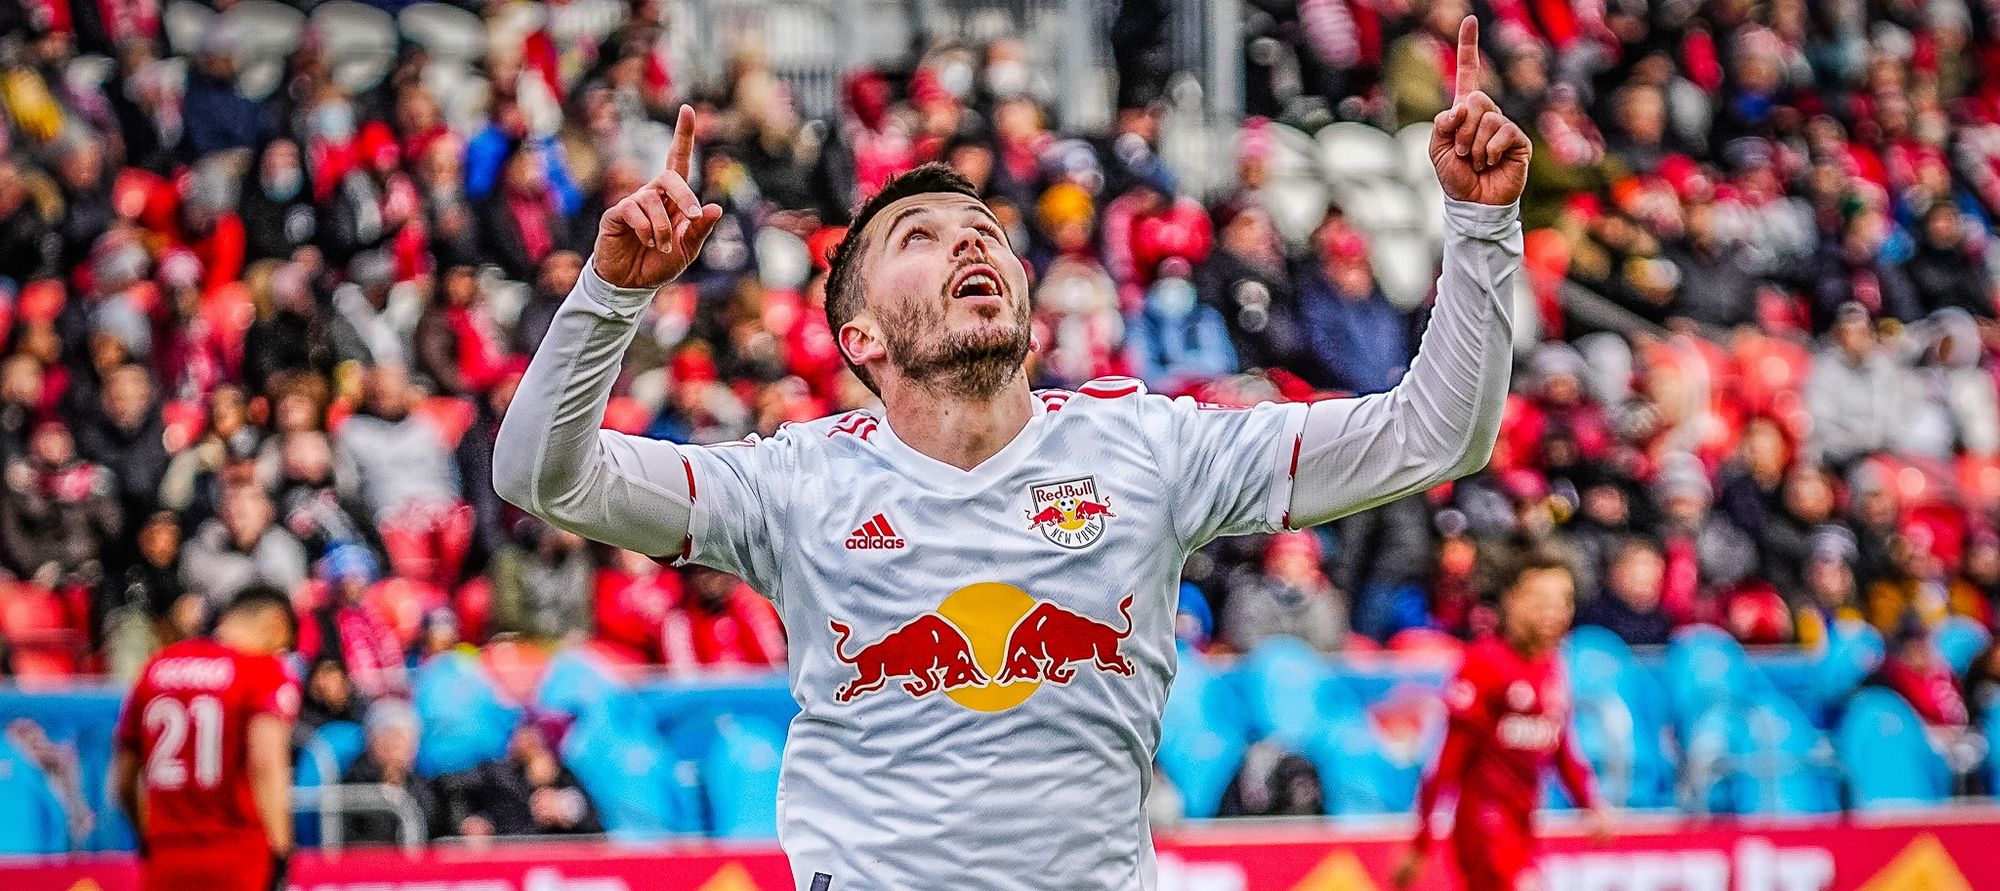 Toronto FC hammered by New York Red Bulls in home opener